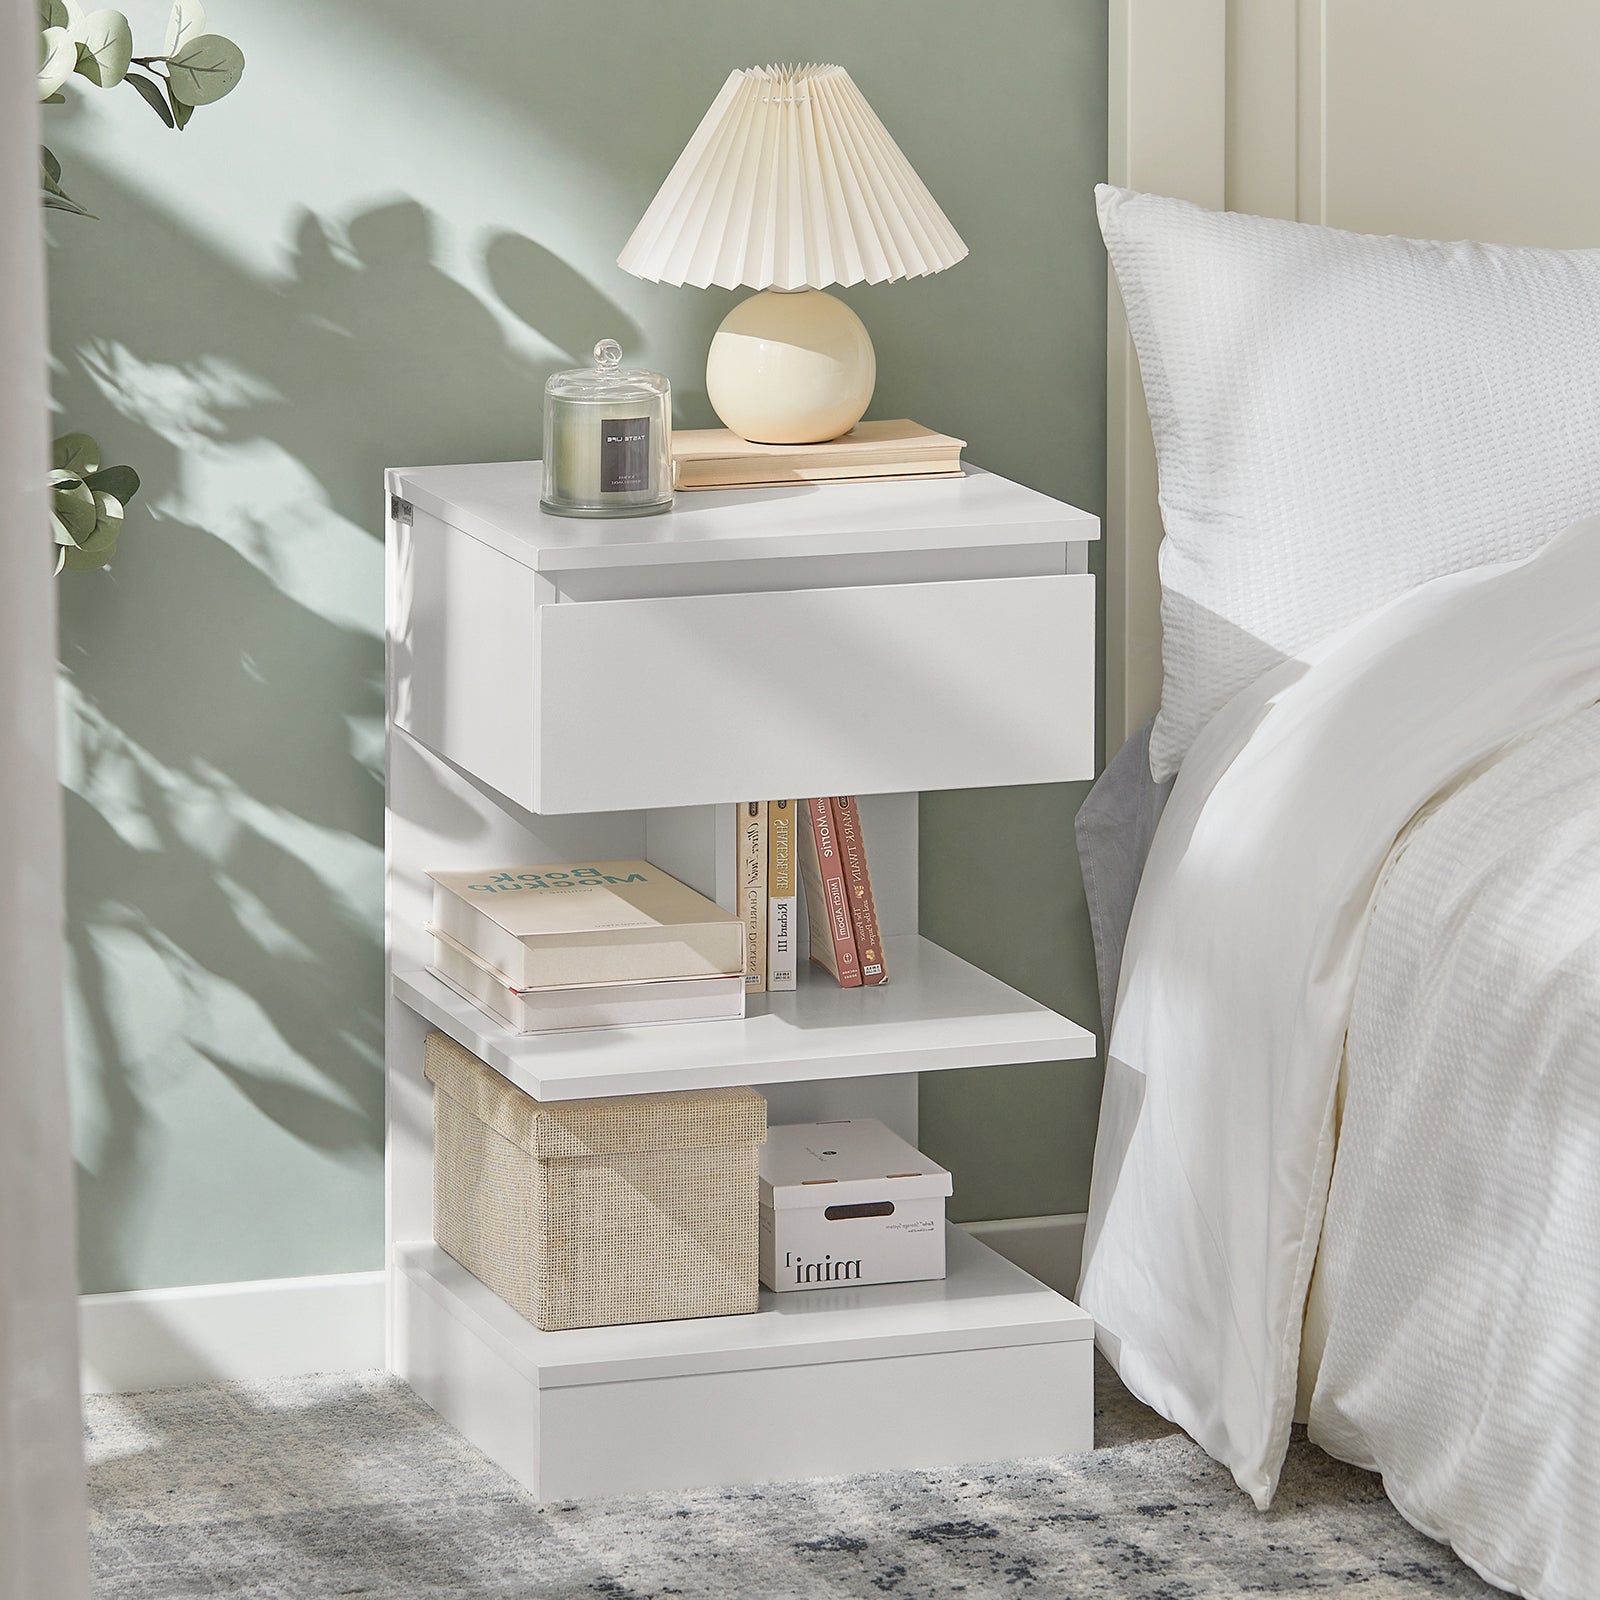 SoBuy Home Wood Bedside End Table with Drawer & Storage Shelves White,FBT49-W